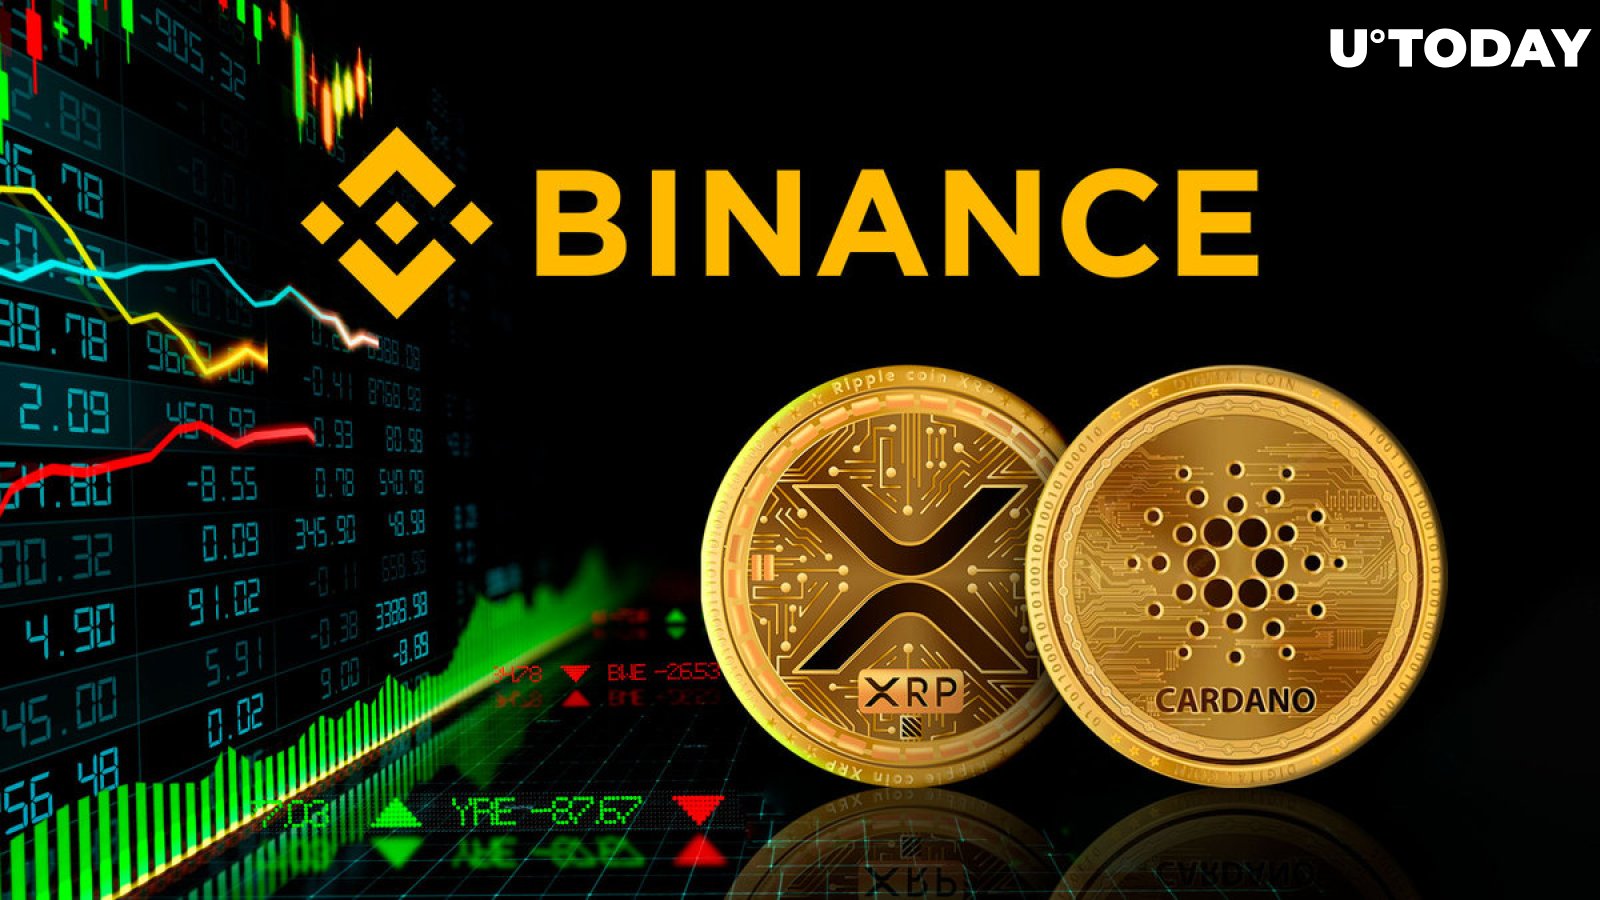 XRP and Cardano (ADA) Score New Major Listing on Binance Amid Epic Announcement